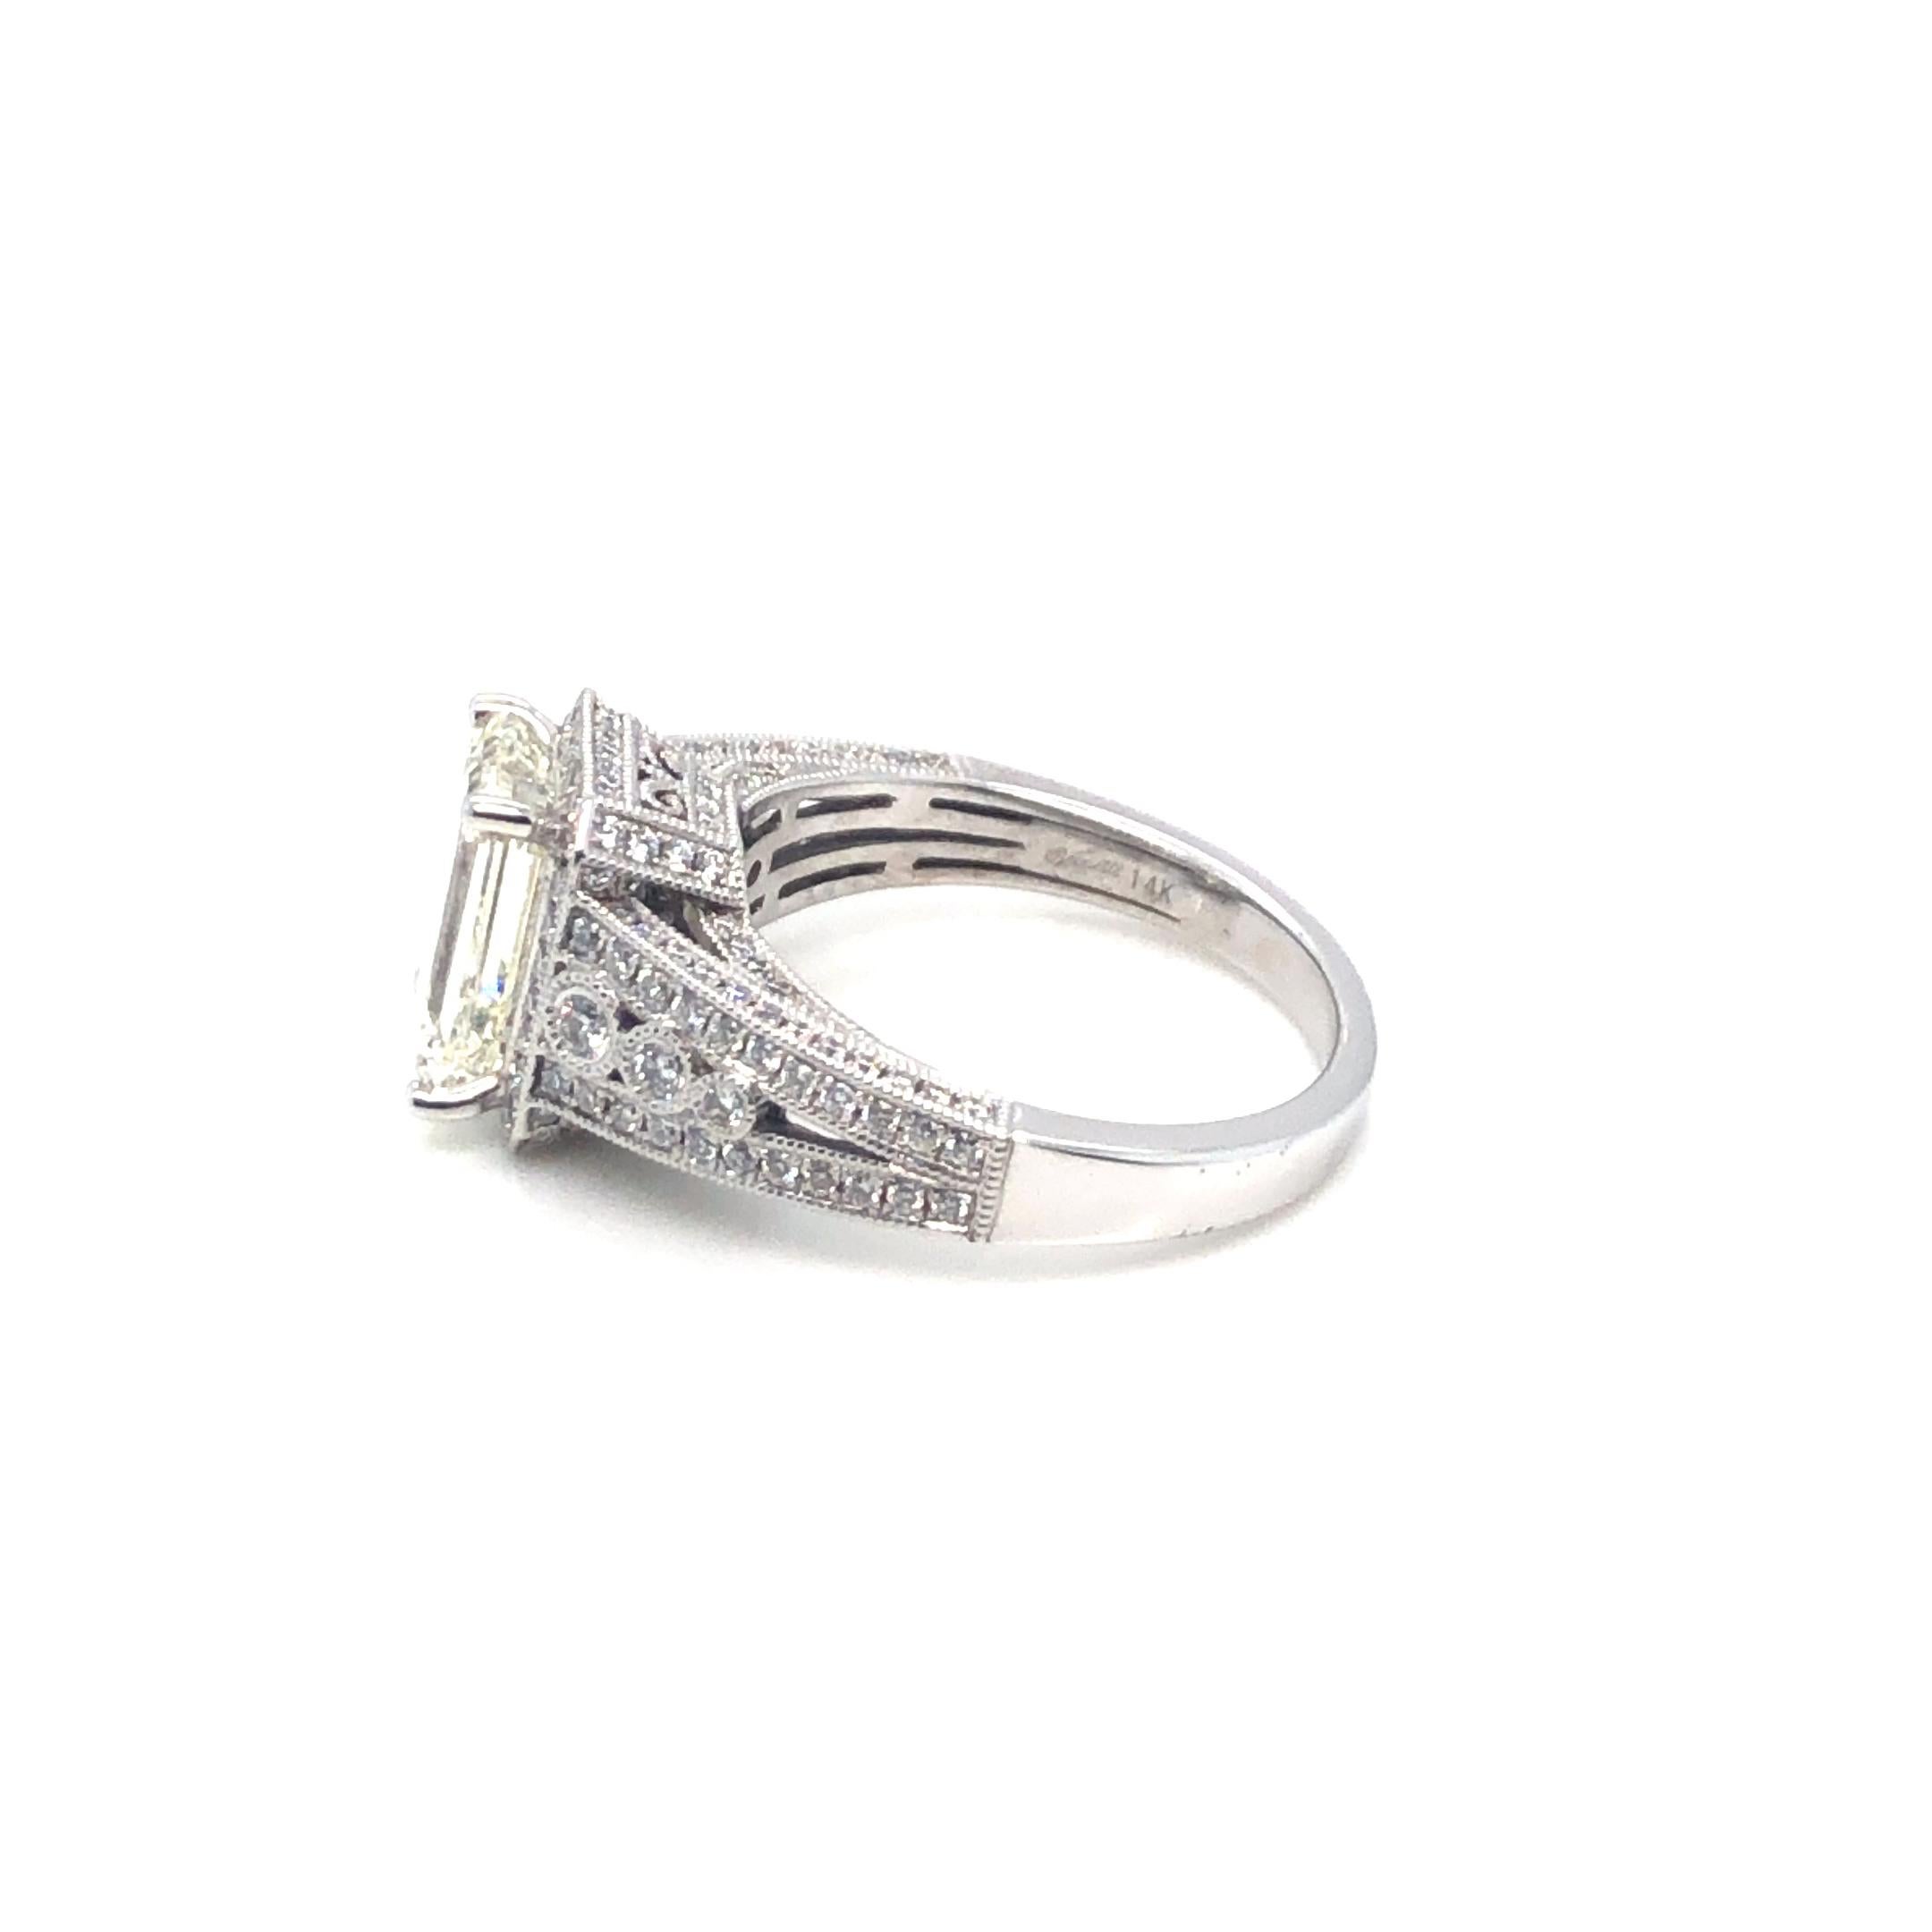 Emerald Cut 3.01ct Diamond Engagement Ring 14K White Gold In Excellent Condition For Sale In Dallas, TX